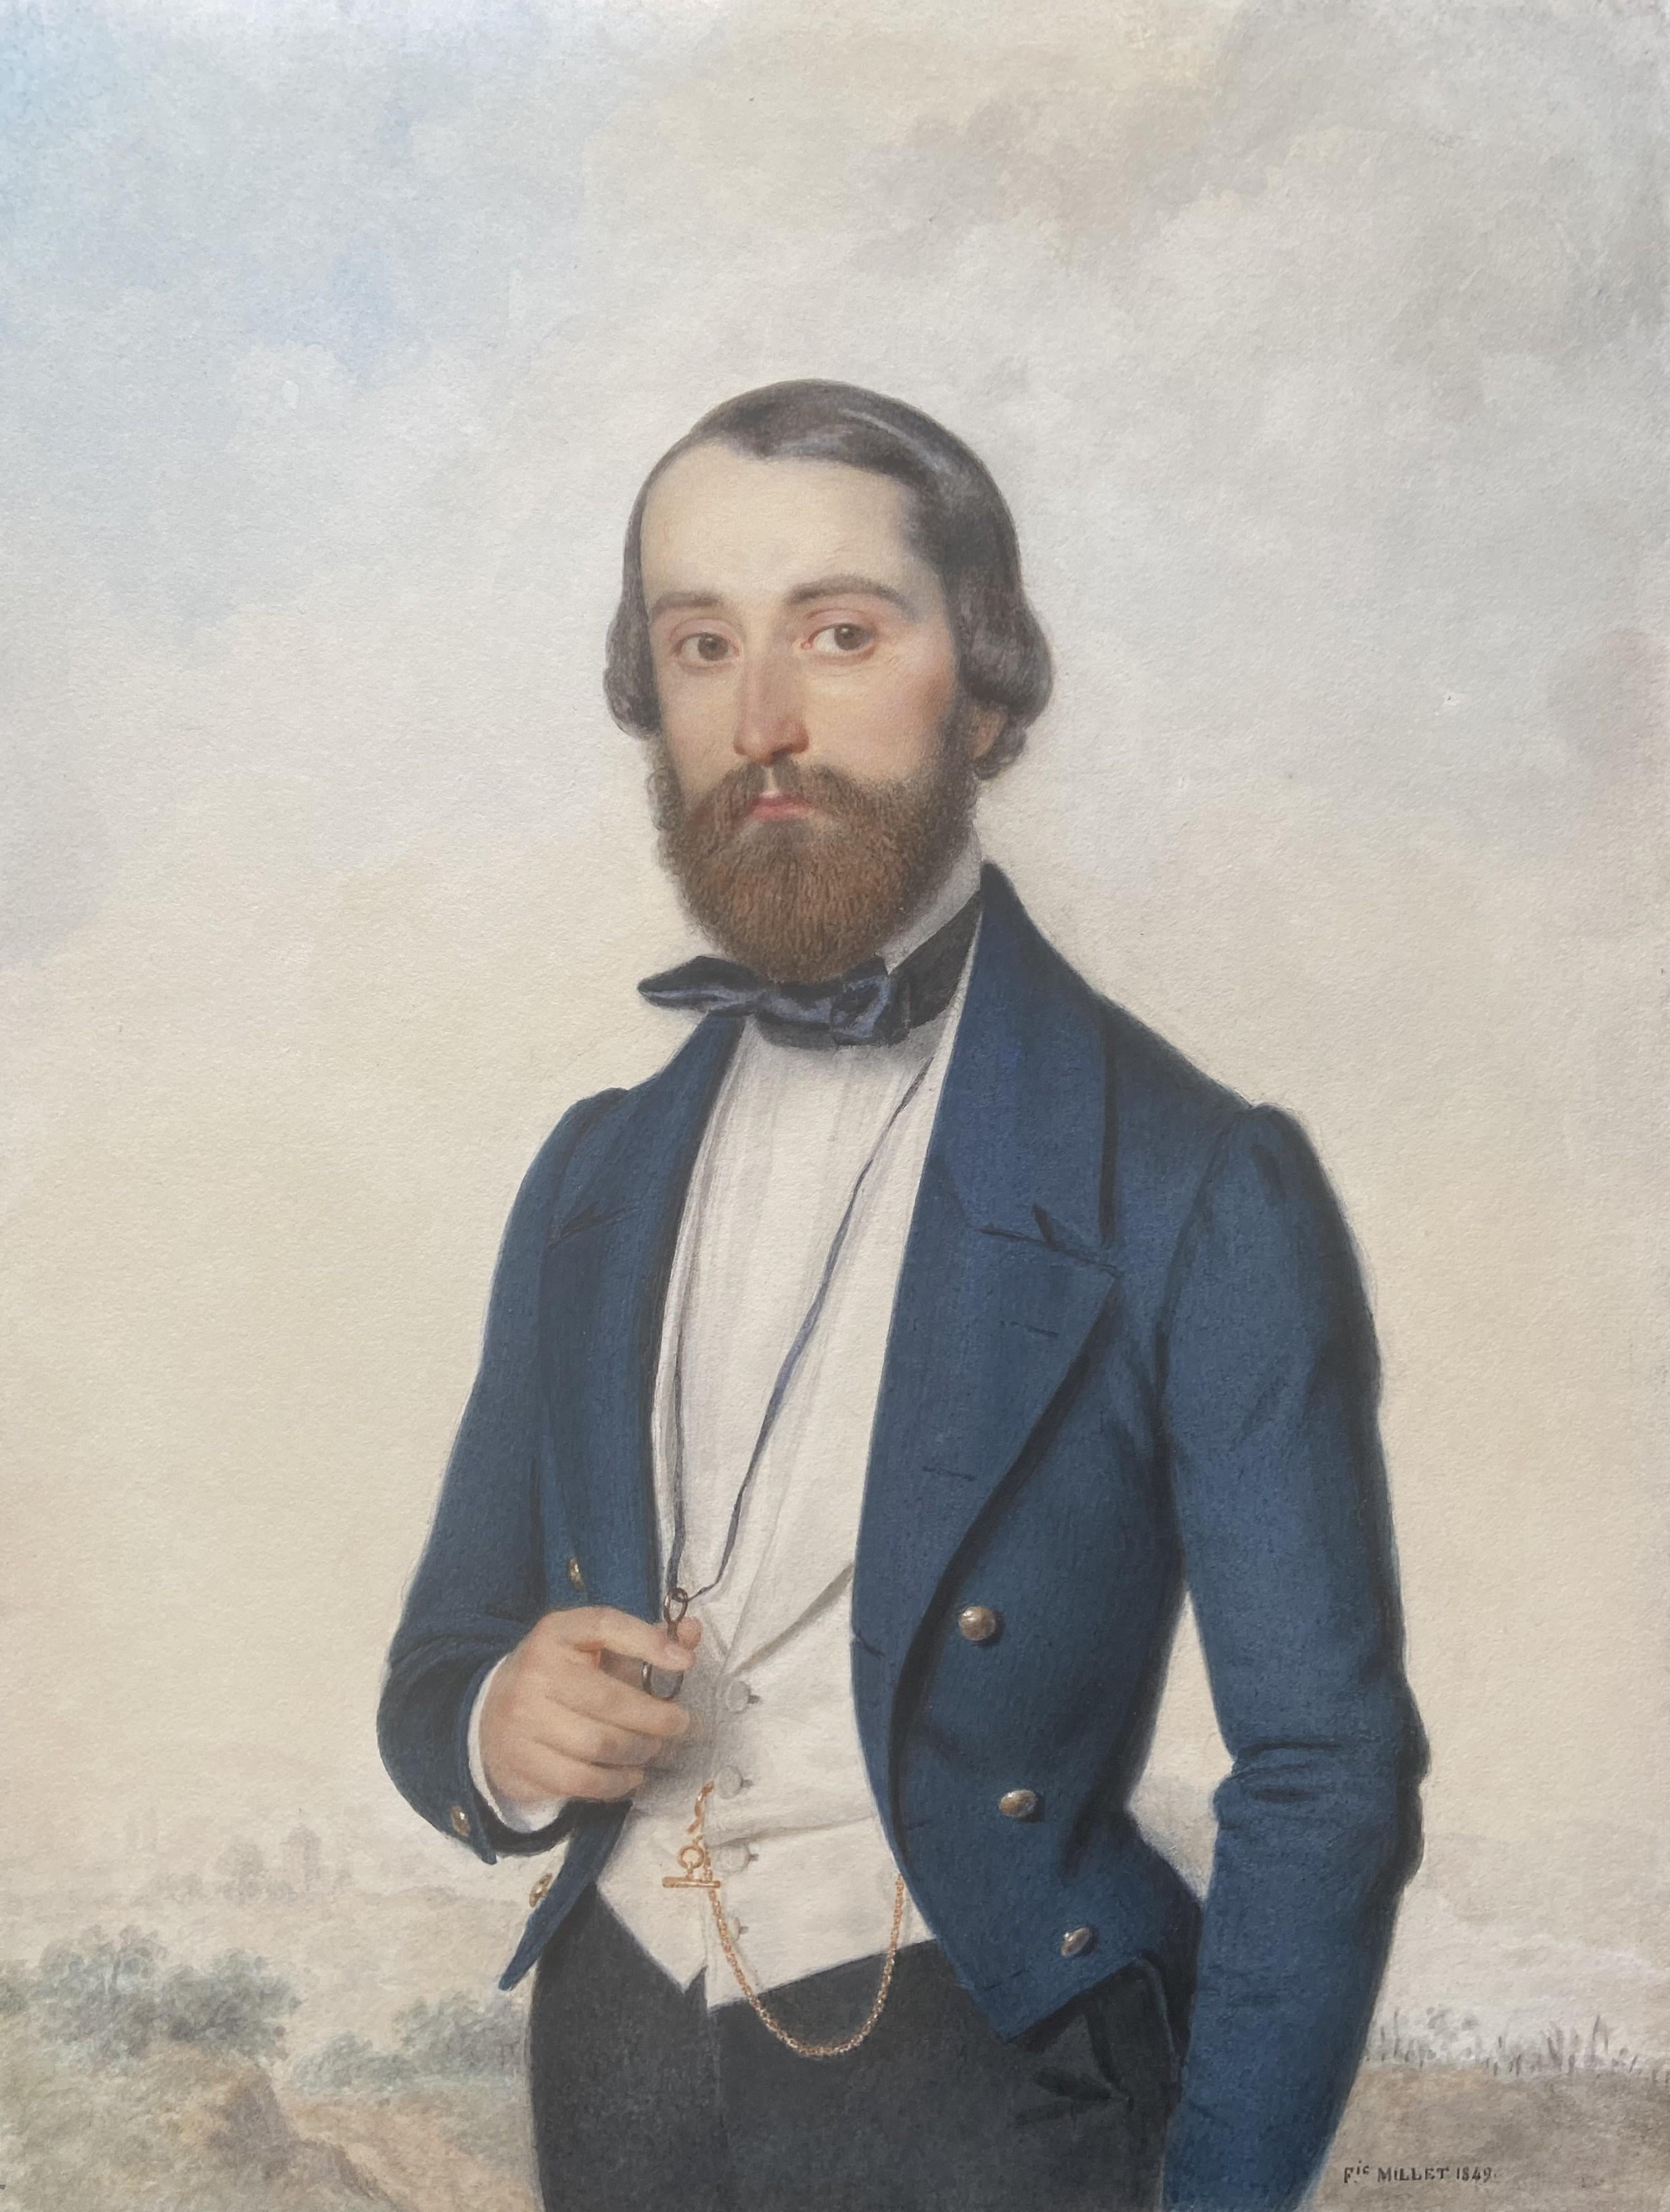 Frédéric Millet (1786-1859) 
Portrait of a gentleman, 1849 
signed  and dated lower right
Watercolor on paper
36 x 27,5 cm
framed : 44 x 35 cm

Frédéric Millet is rightly renowned for his portraits, particularly in miniature. It is therefore